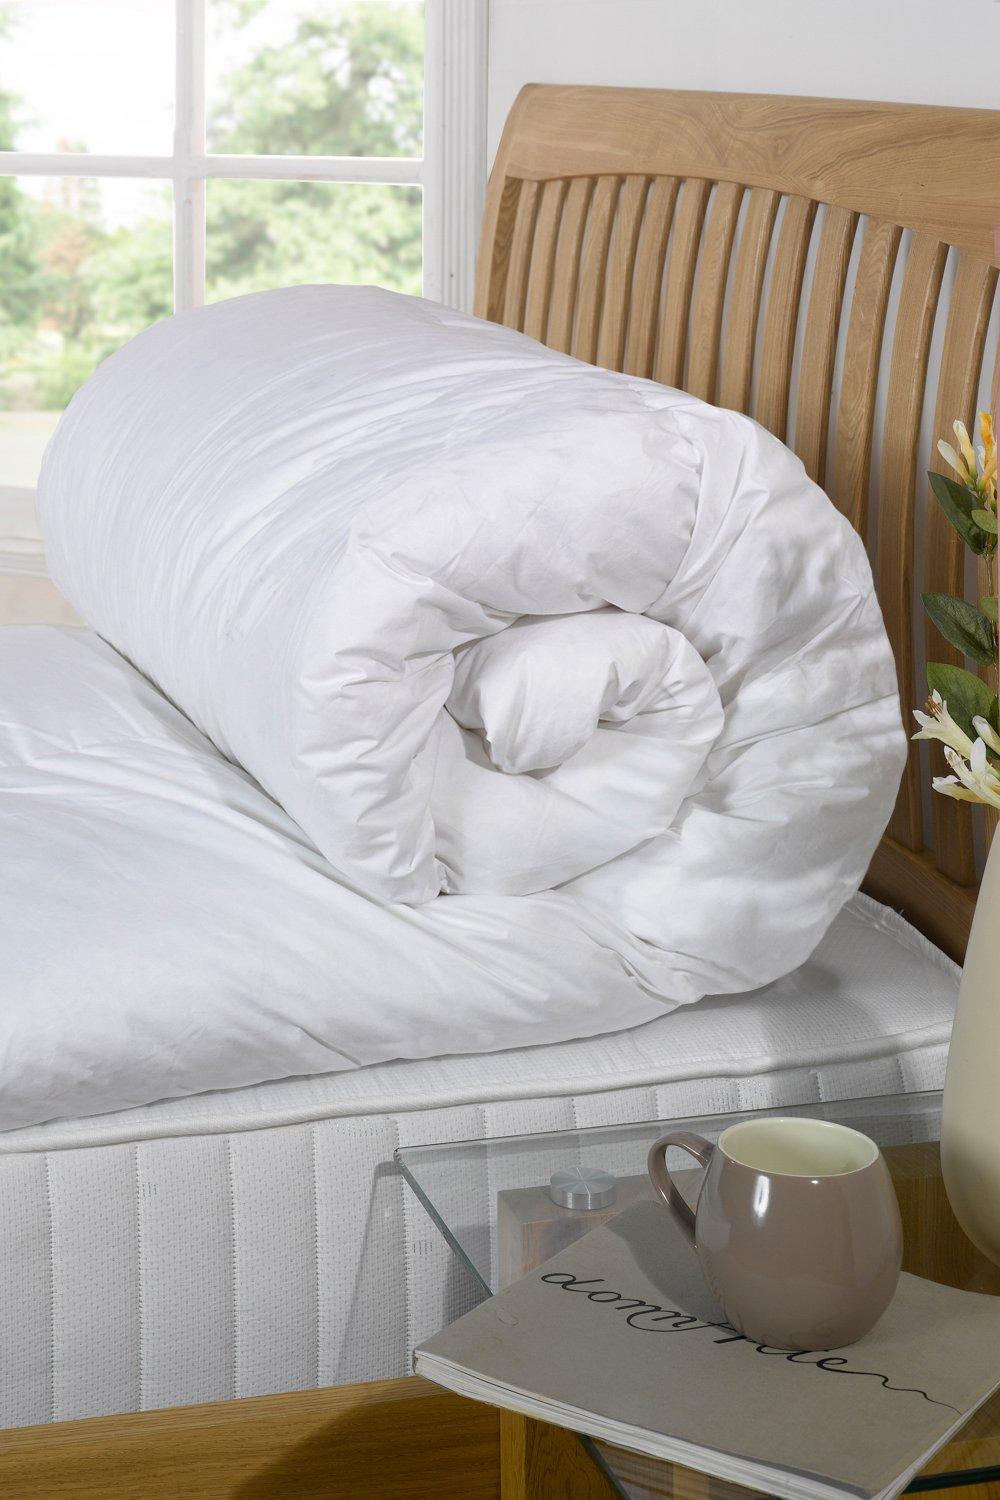 Natural Duck Feather and Down Duvet